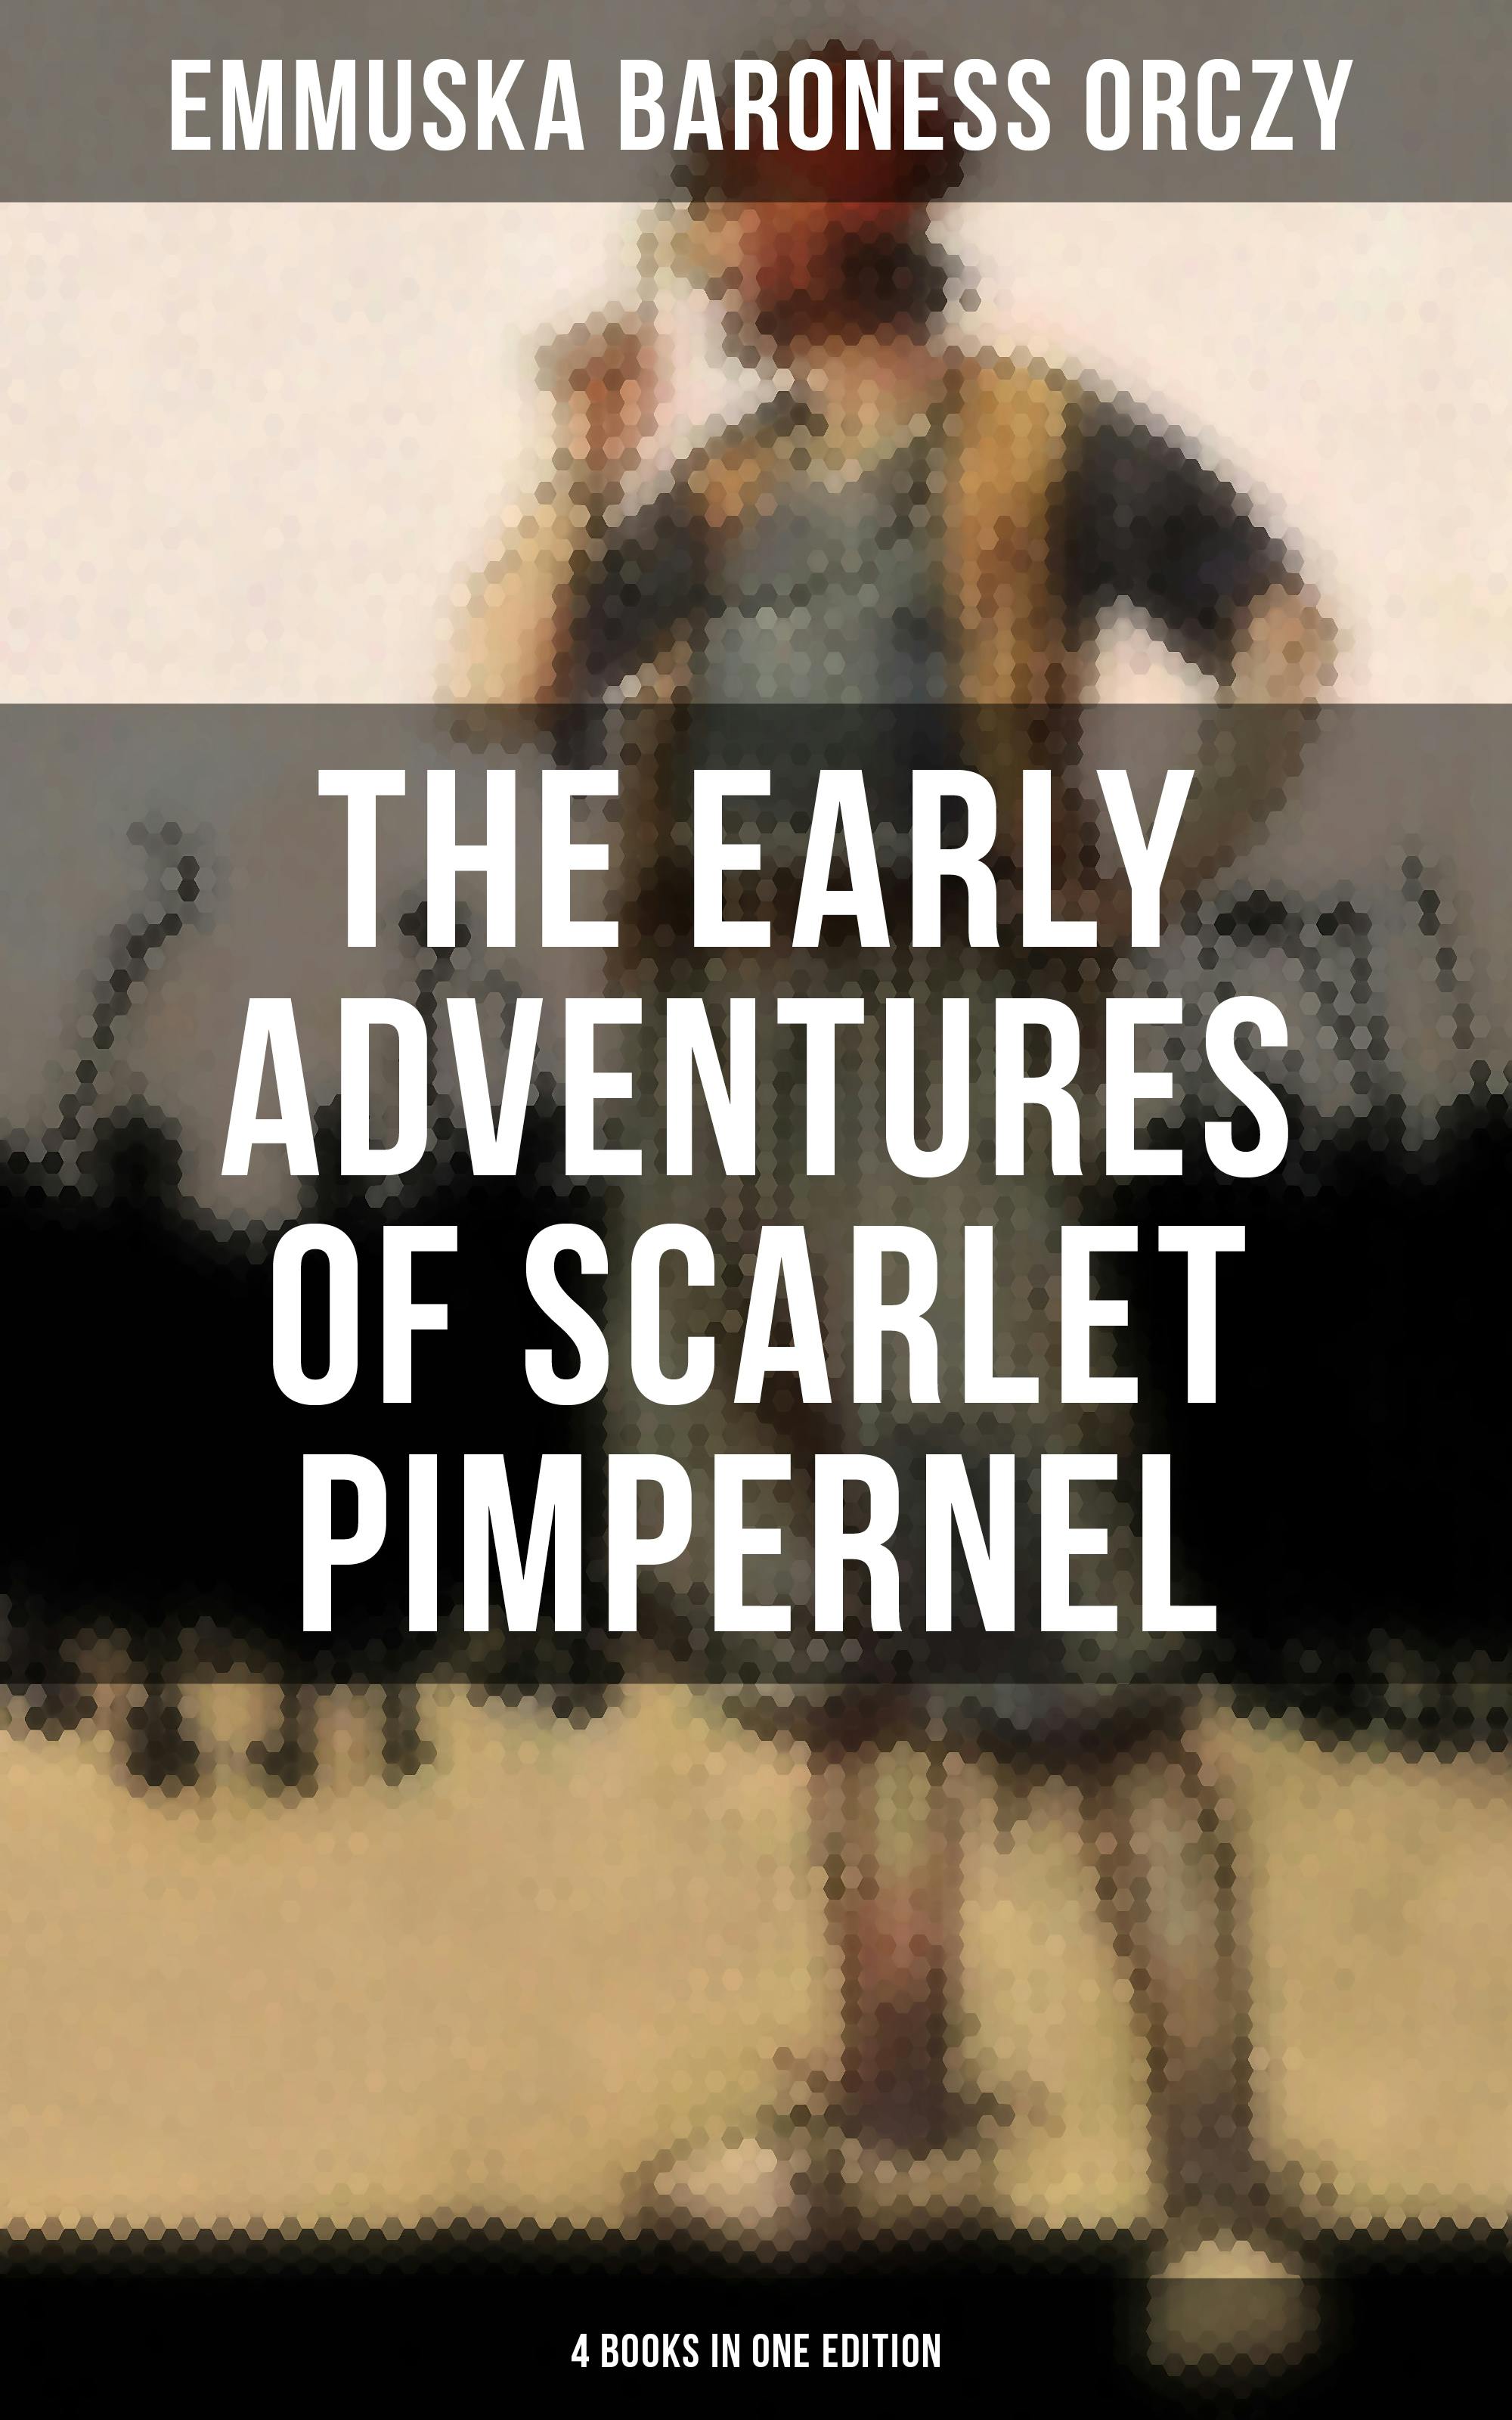 The Early Adventures of Scarlet Pimpernel - 4 Books in One Edition: Scarlet Pimpernel, The Elusive Pimpernel, The League & The Triumph of the Scarlet Pimpernel - undefined